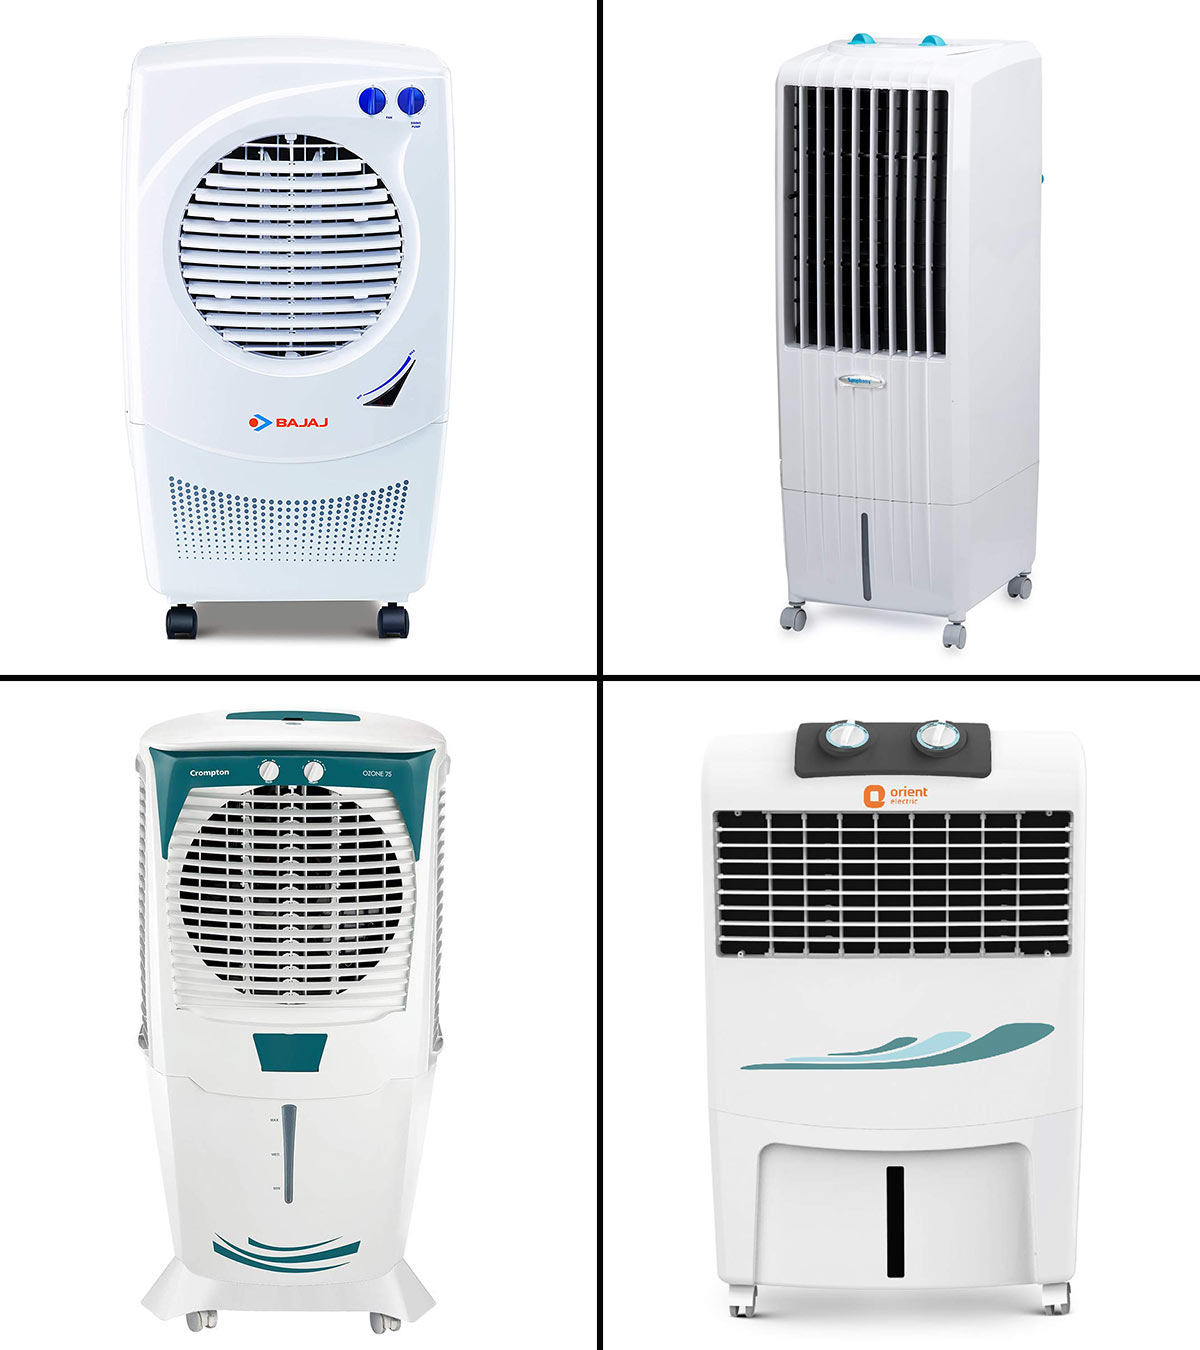 https://www.momjunction.com/wp-content/uploads/2021/01/11-Best-Air-Coolers-In-India-In-20211-1.jpg